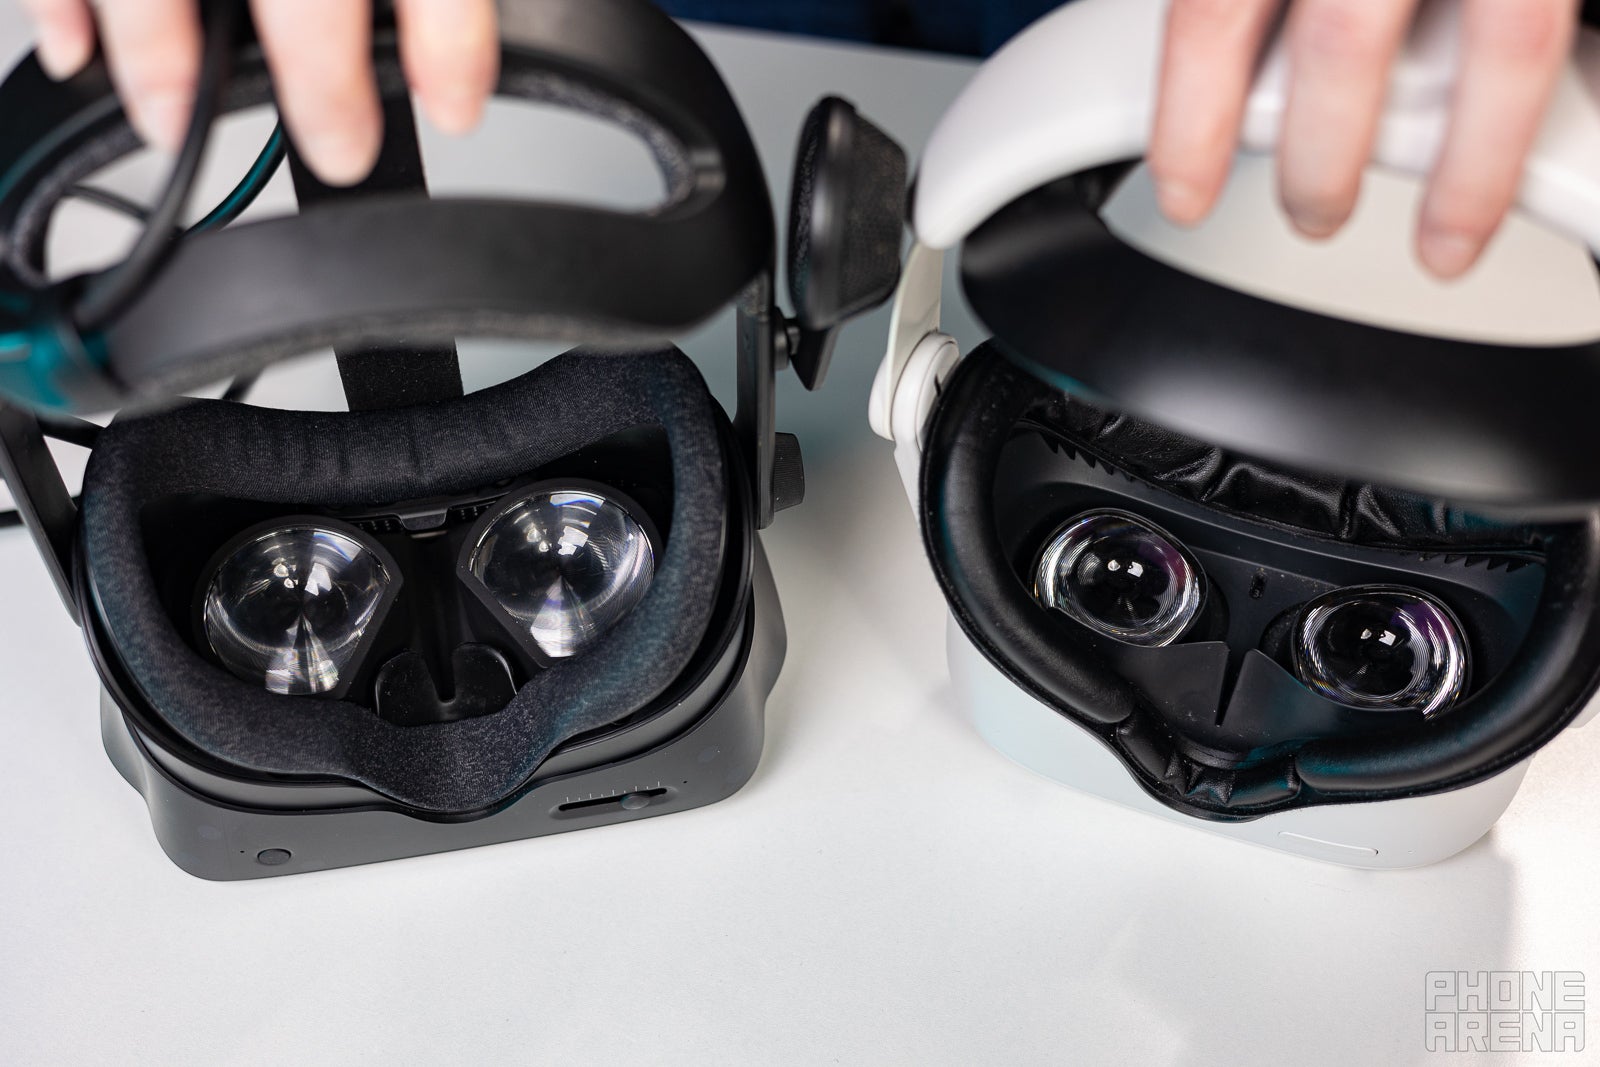 (Image Credit - PhoneArena) The Valve Index (left) has bigger lenses and a higher FOV than the Quest 2 (right), but its display is lower resolution - Meta Quest 2 vs Valve Index: Meta is just on another level with its virtual reality headsets